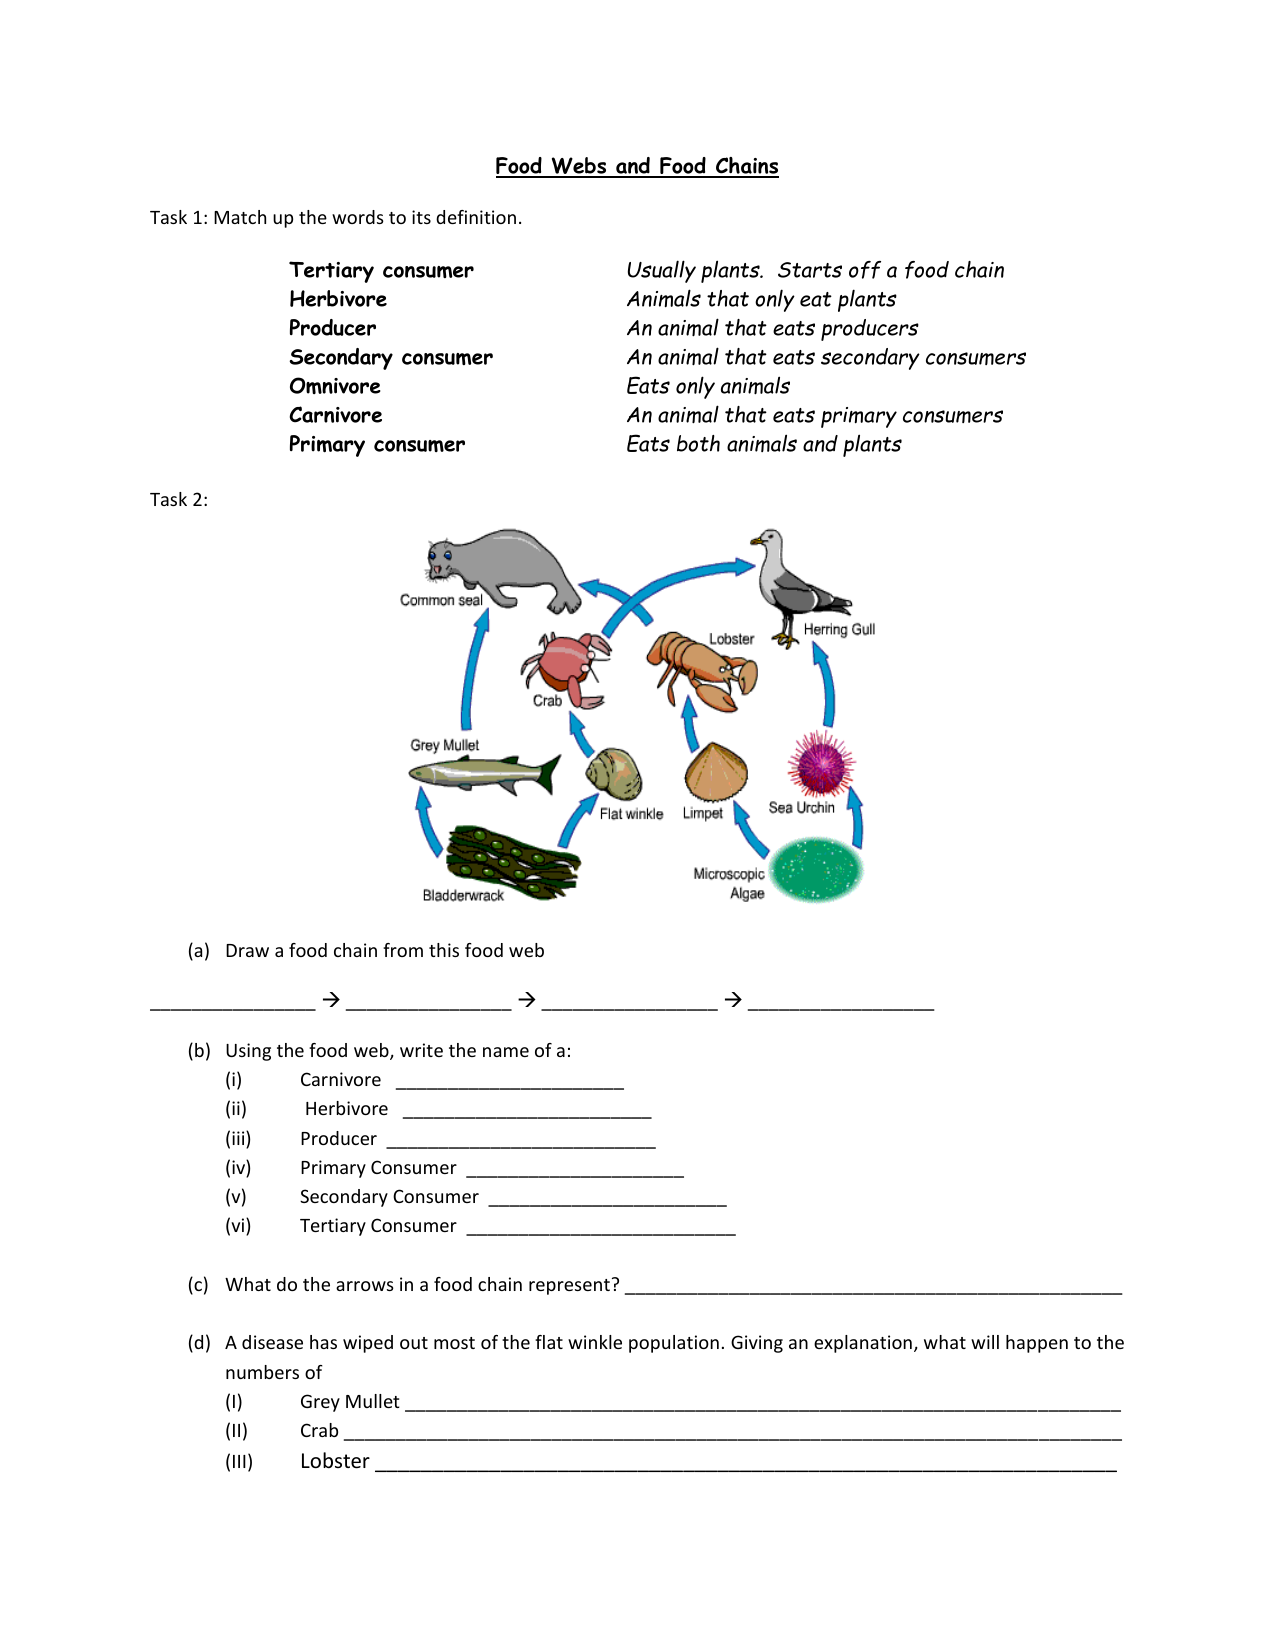 Food Chains and Webs worksheet With Food Chain Worksheet Pdf